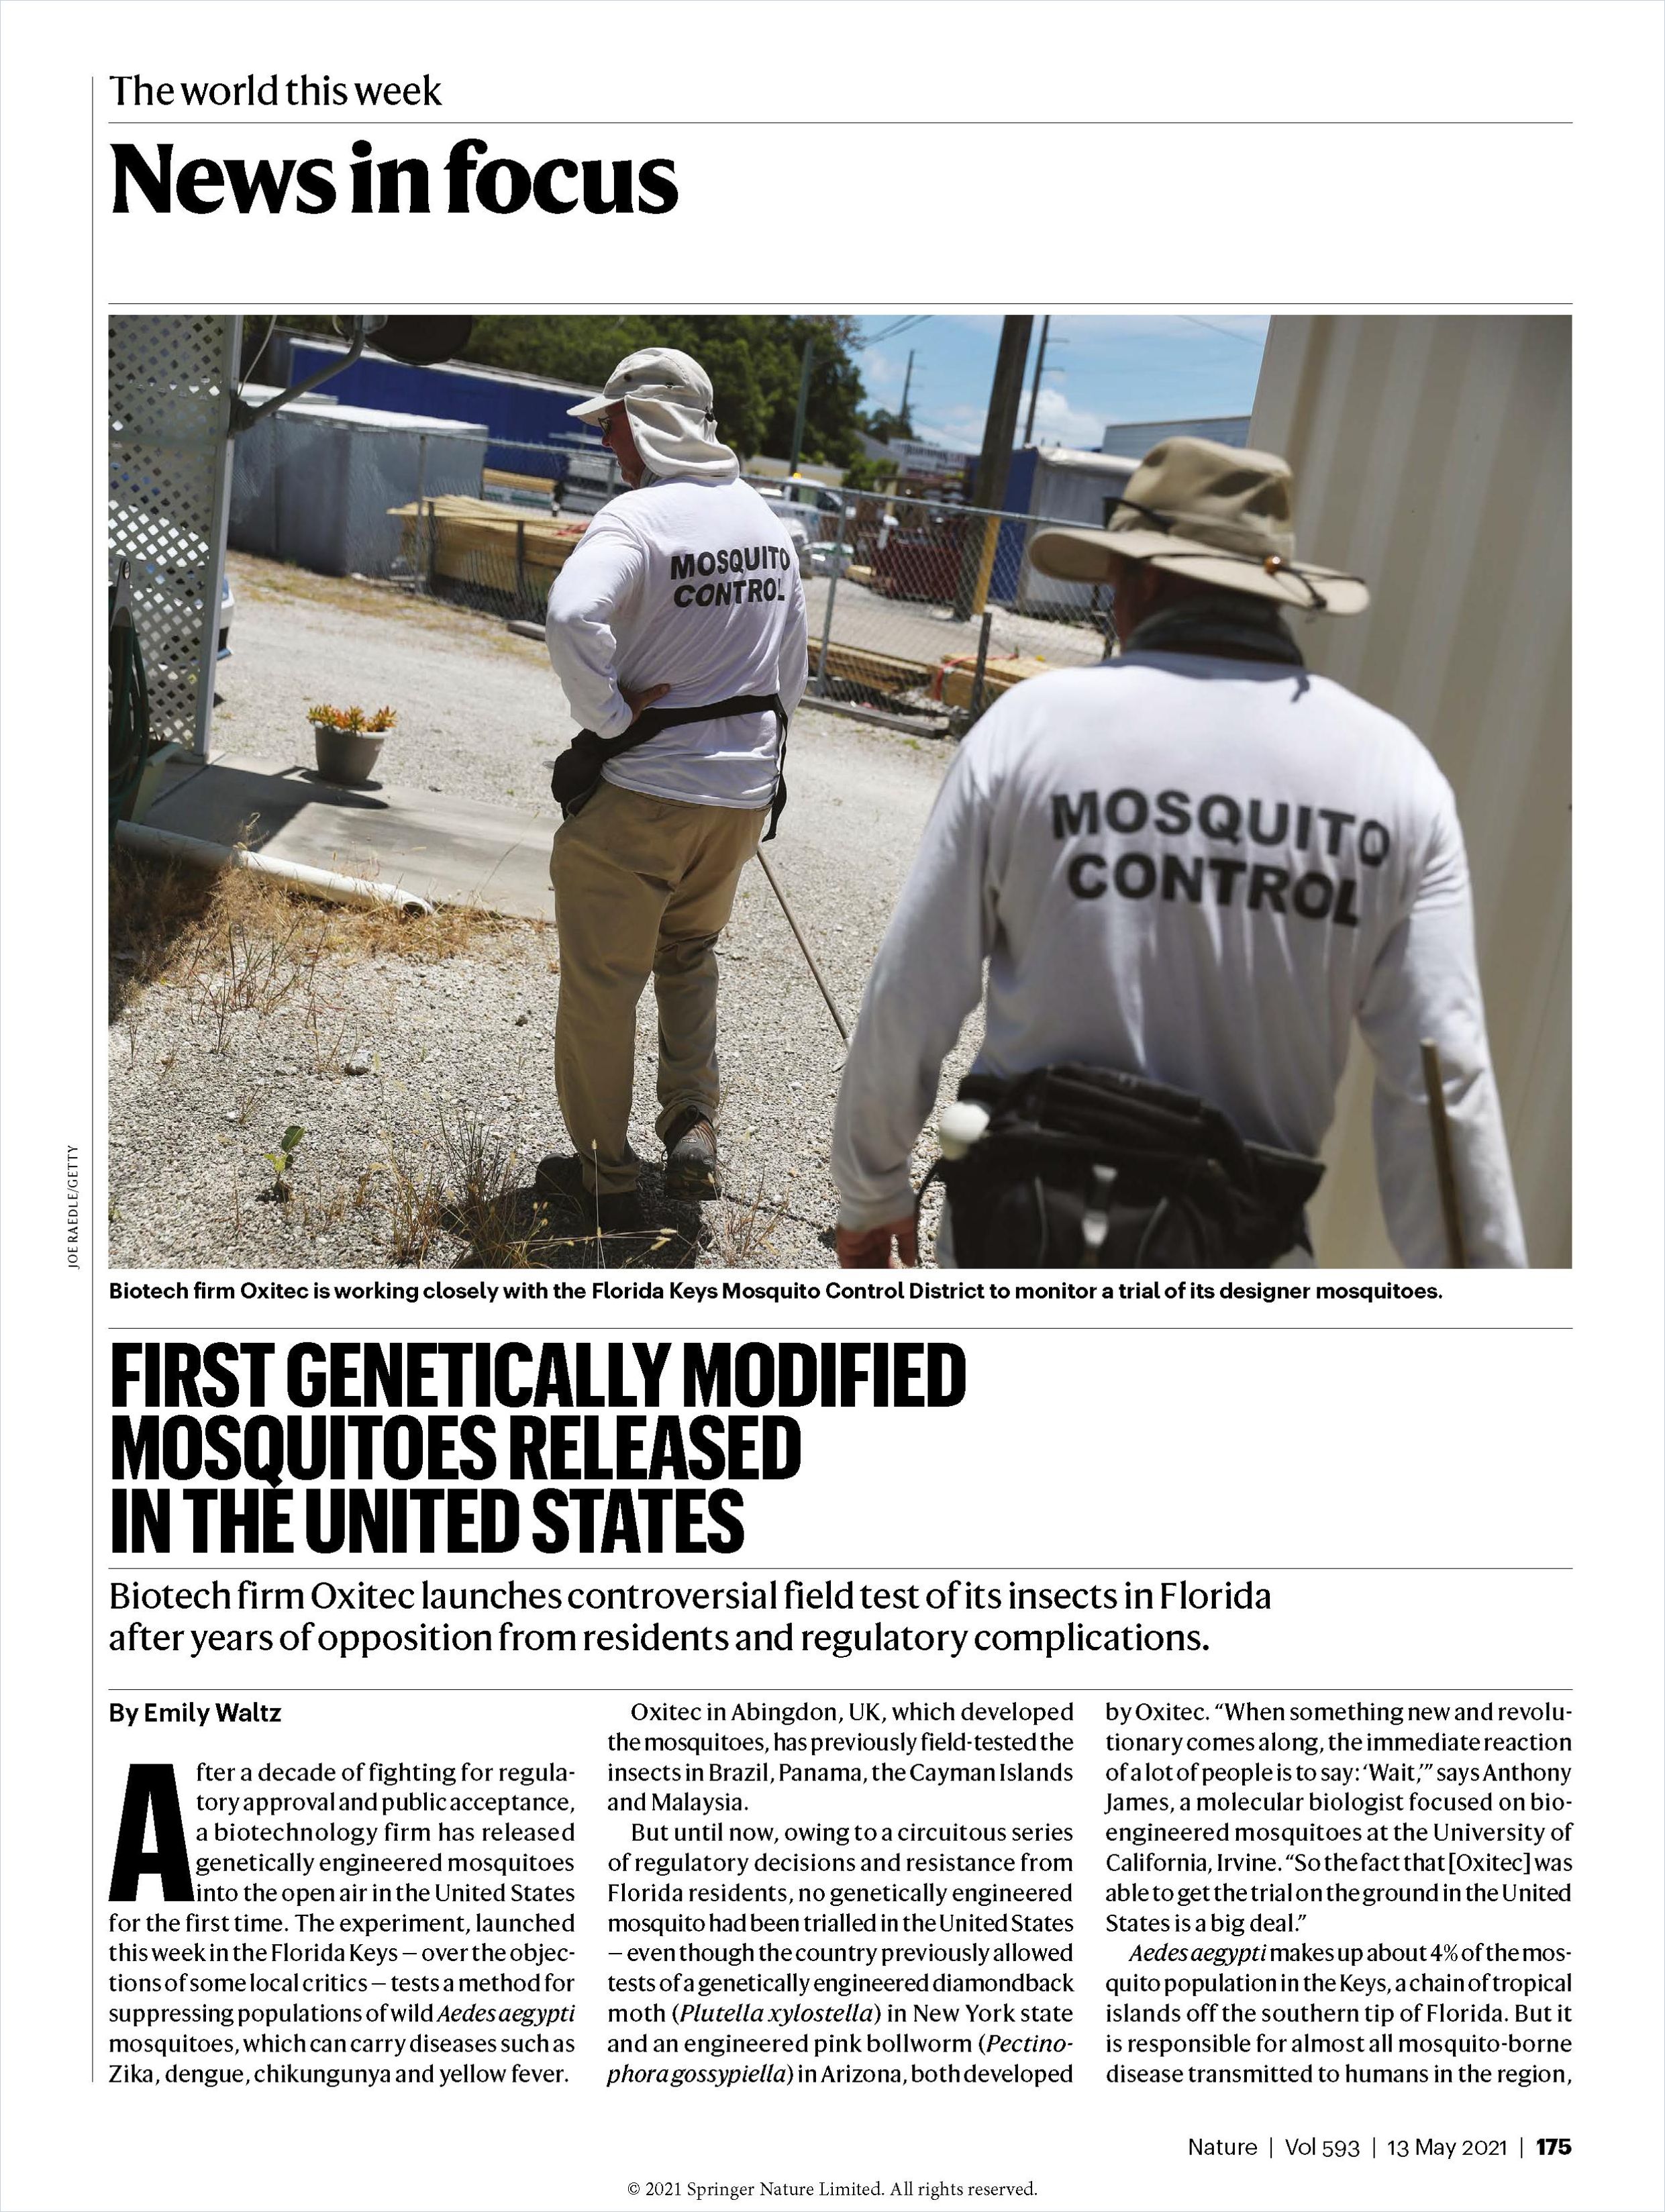 Image of: First Genetically Modified Mosquitoes Released in the United States